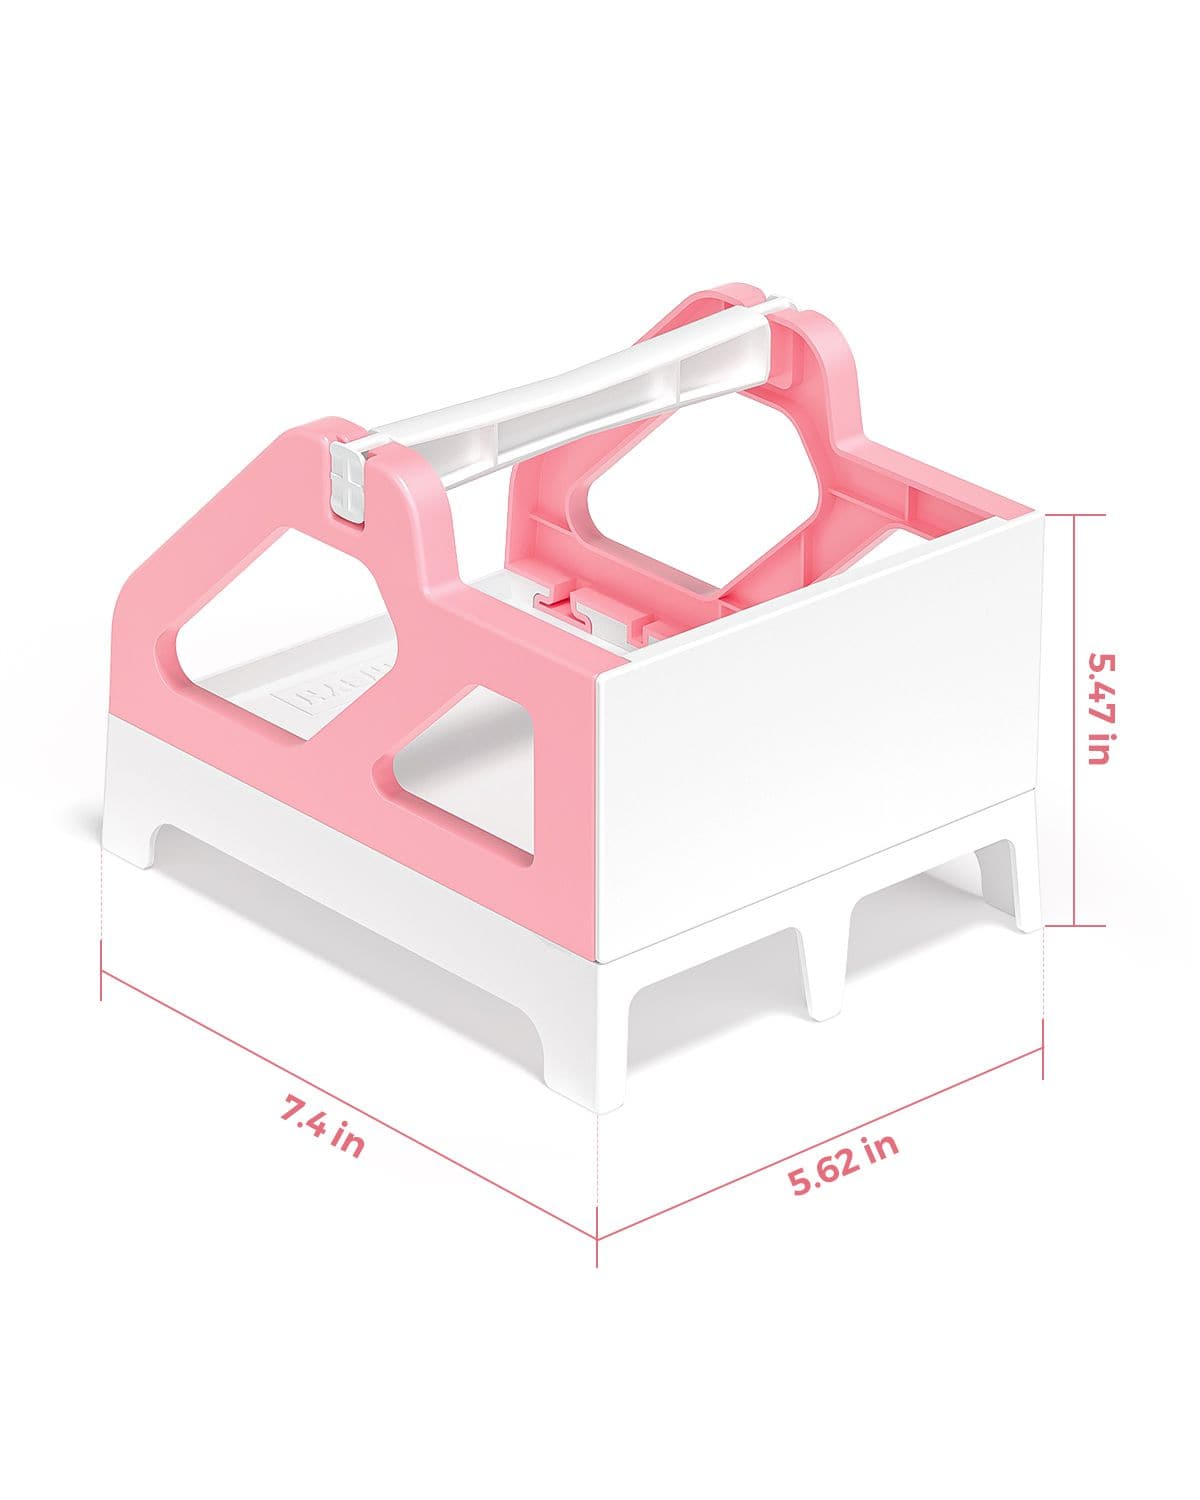 MUNBYN pink and white plastic label roll holder is 5.62